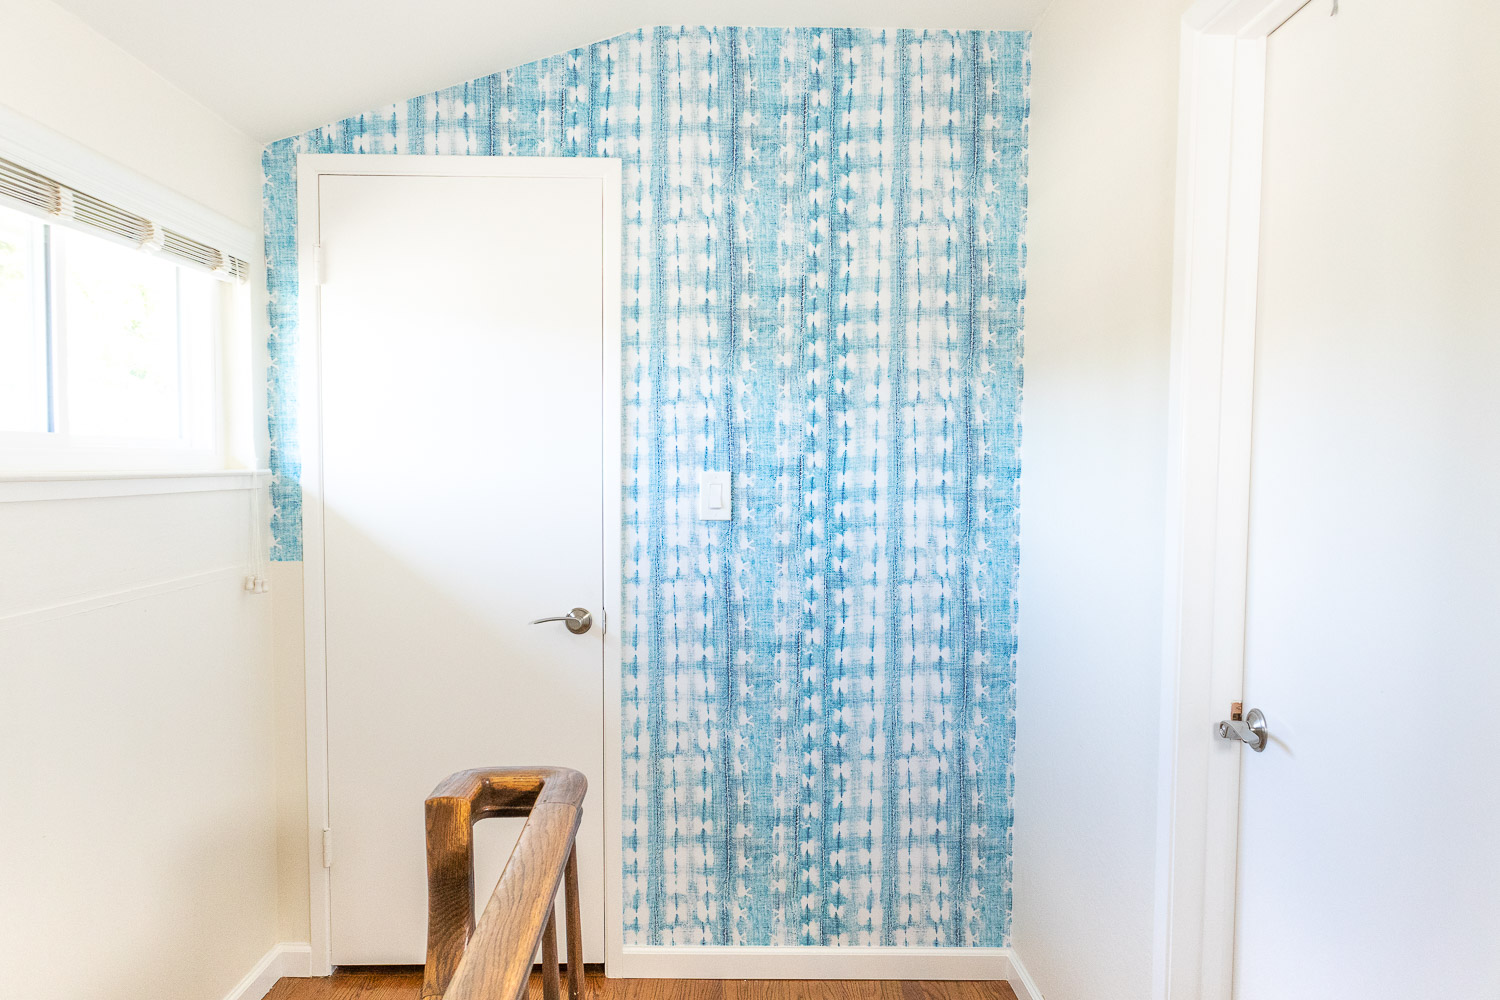 How To DIY A Gorgeous Accent Wall Using Popsicle Sticks